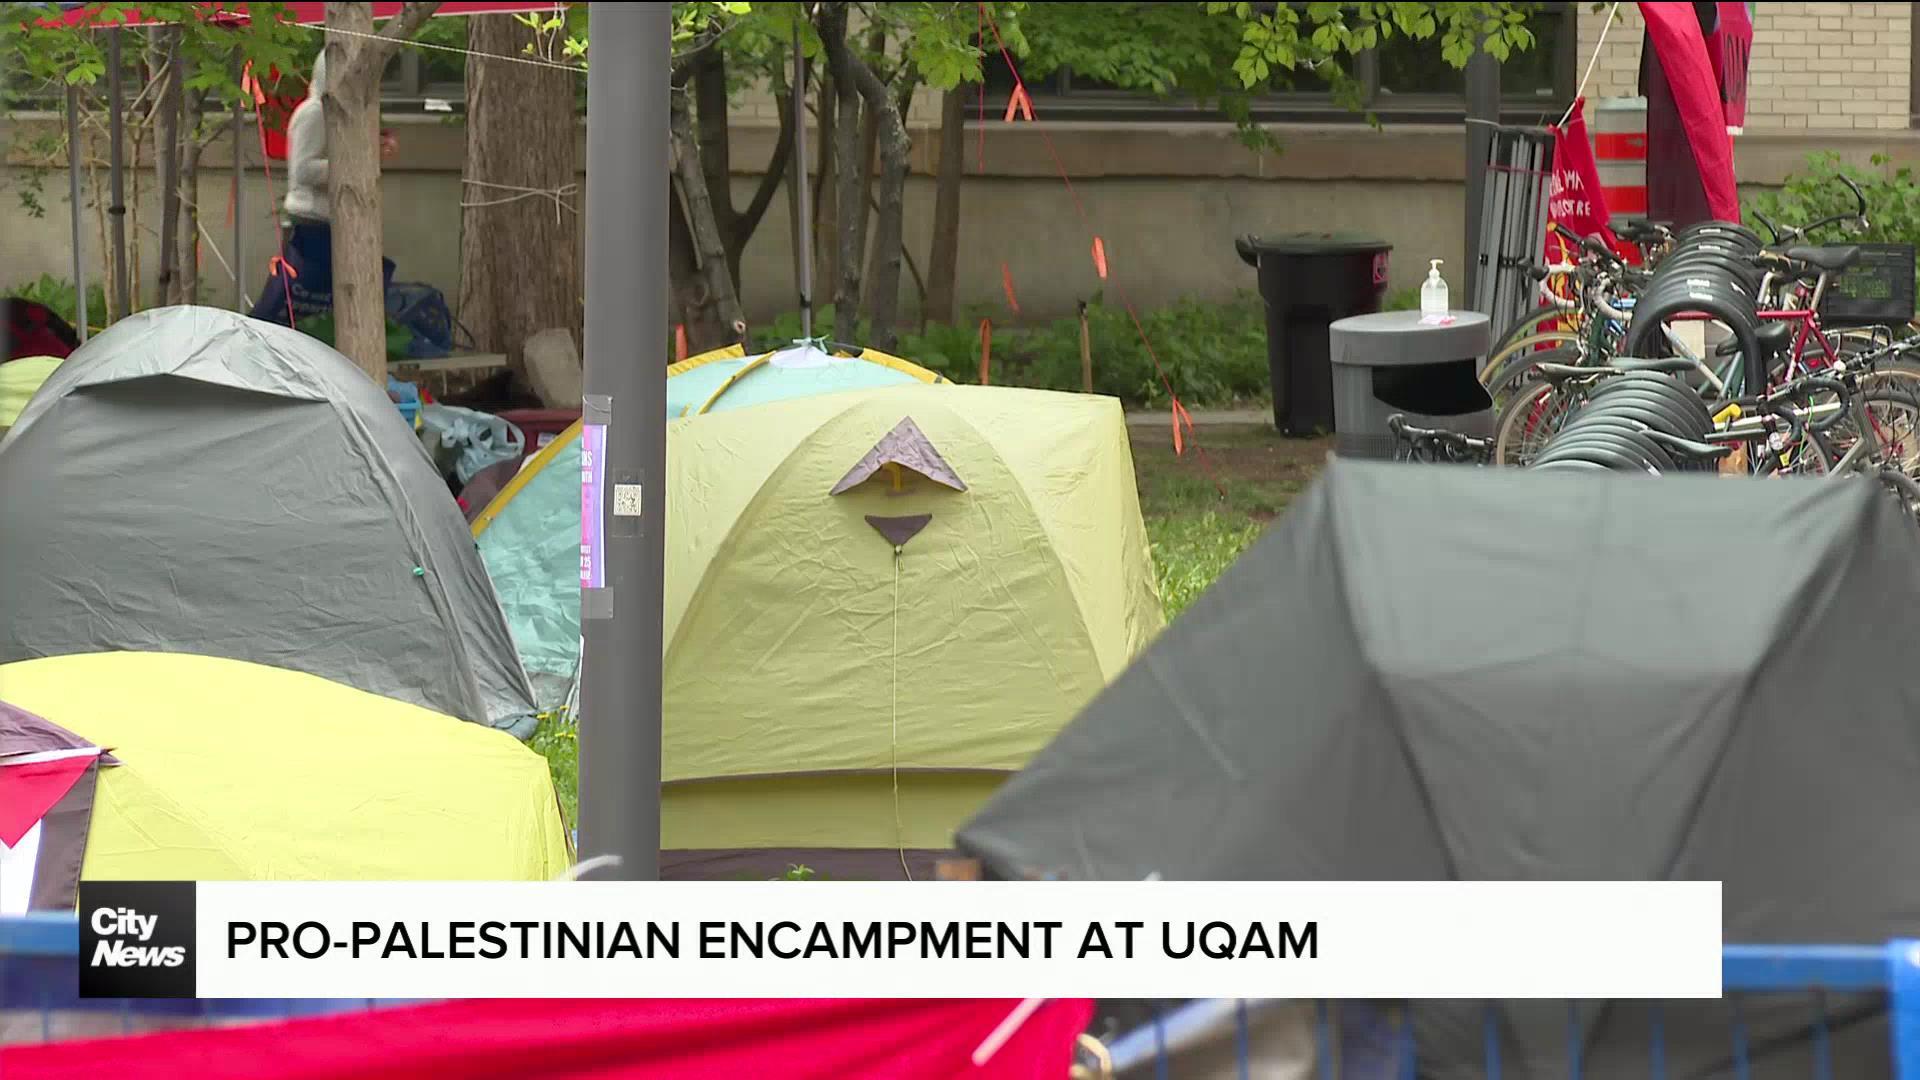 Pro-Palestinian encampment goes up at UQAM in downtown Montreal